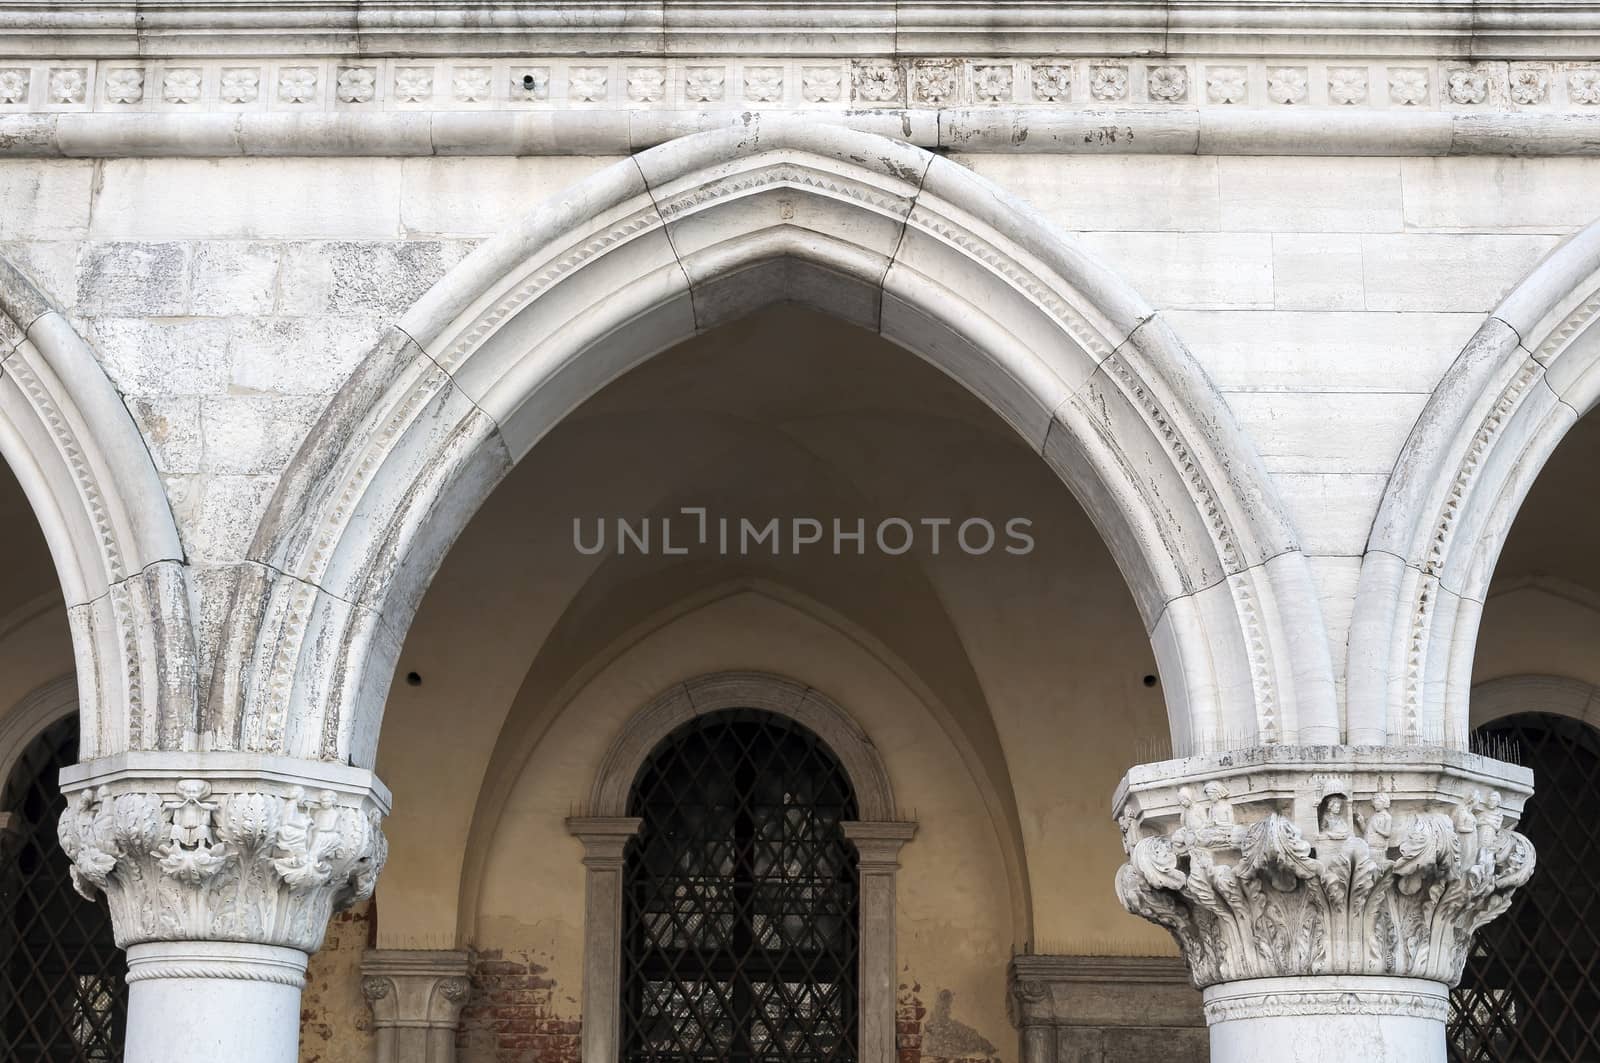 Detail of Venetian architecture, Palazzo Ducale, Venice, Italy.